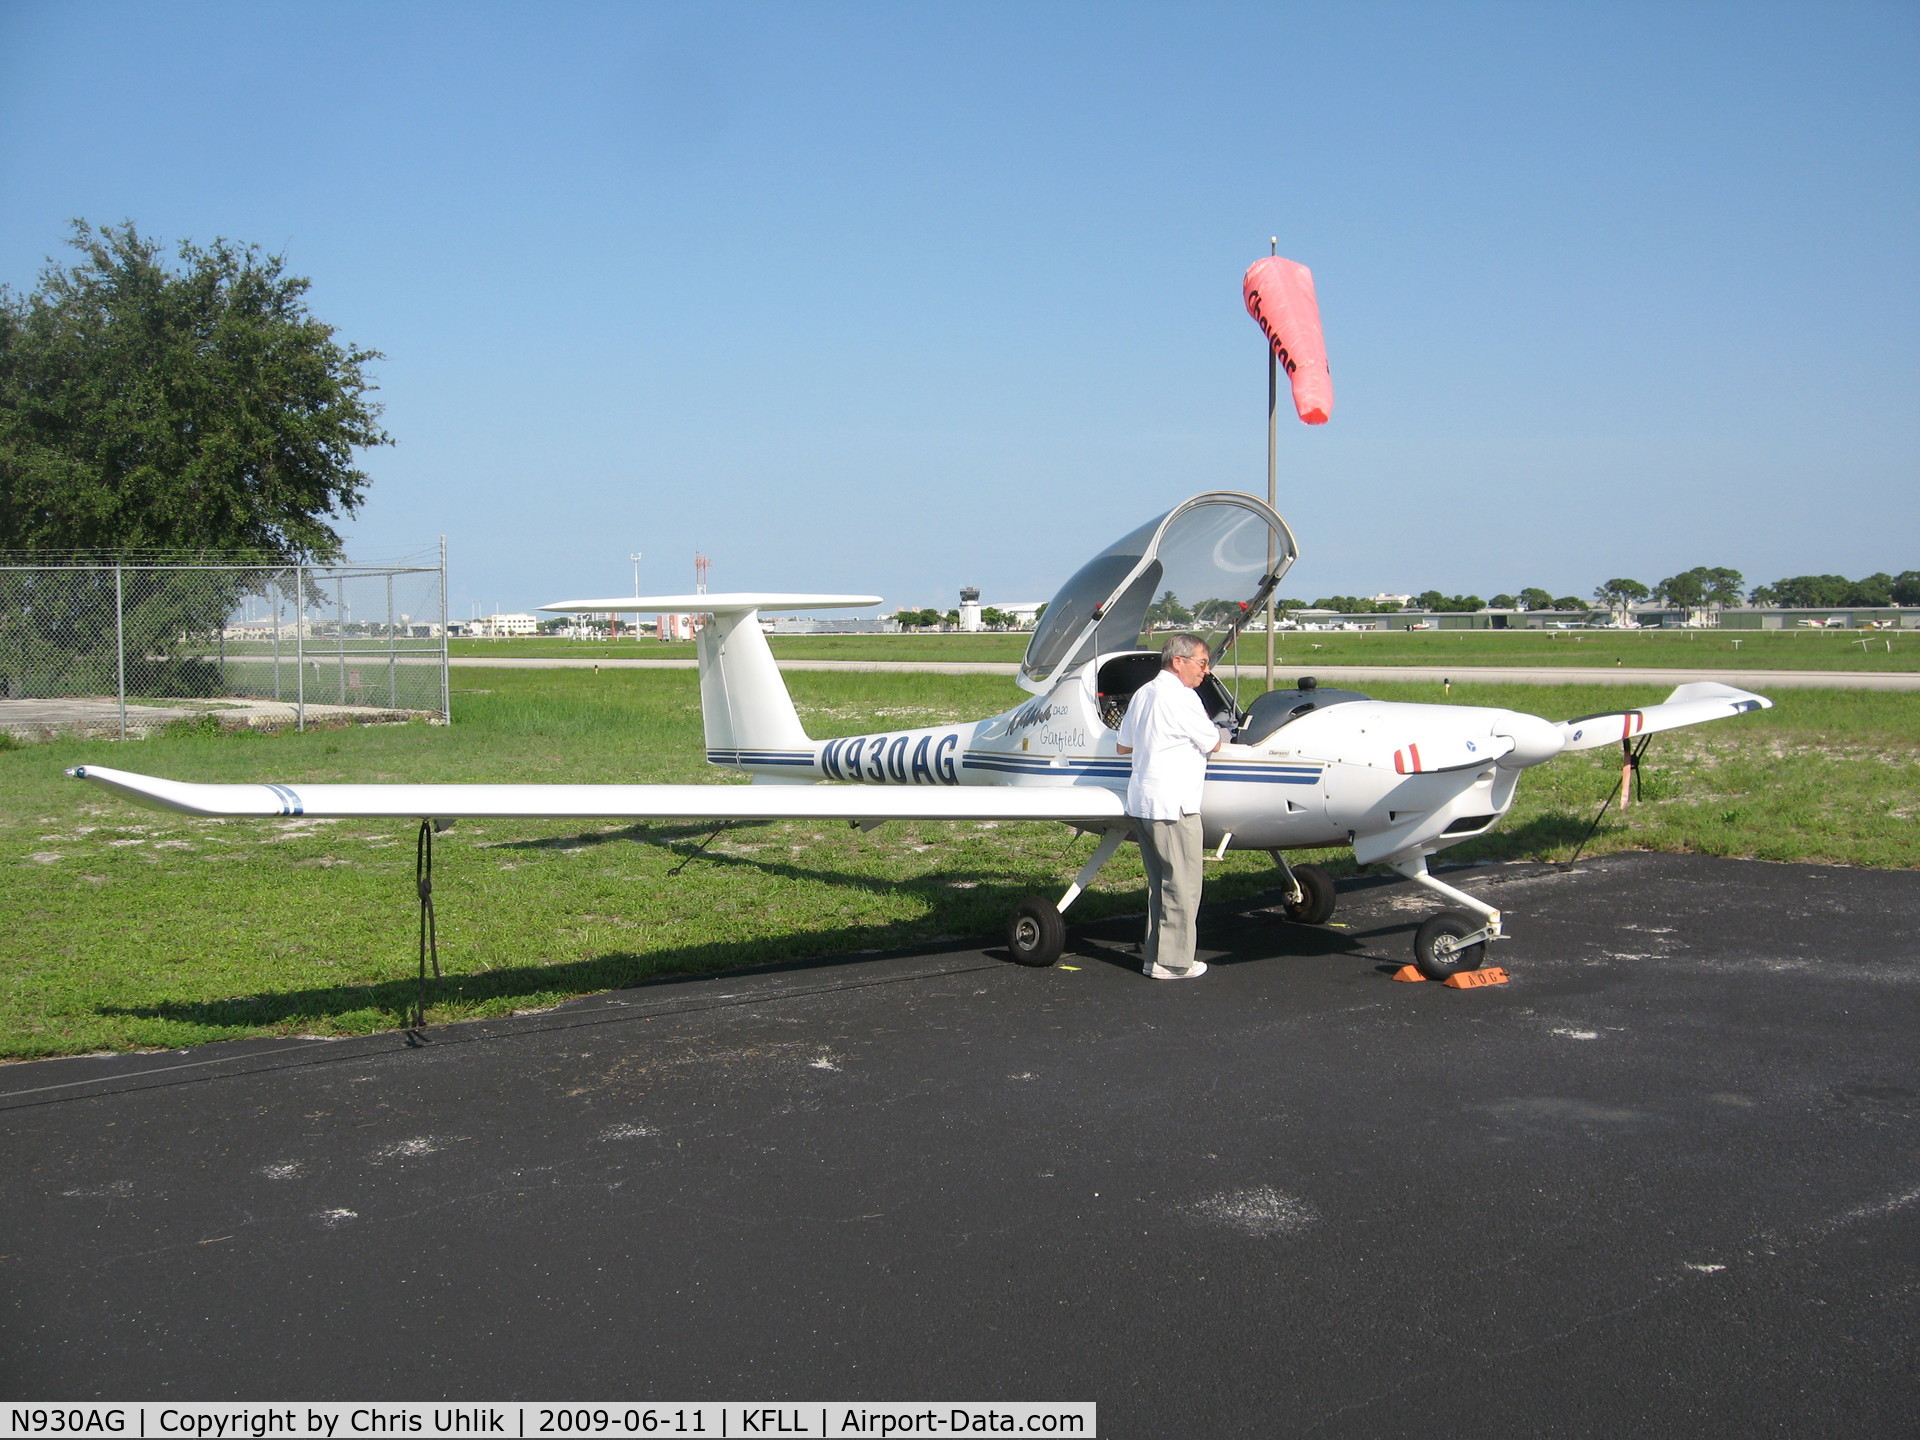 N930AG, 1996 Diamond DA-20A-1 Katana C/N 10196, Picked up in Ft Lauderdale Florida on its way to Livermore California